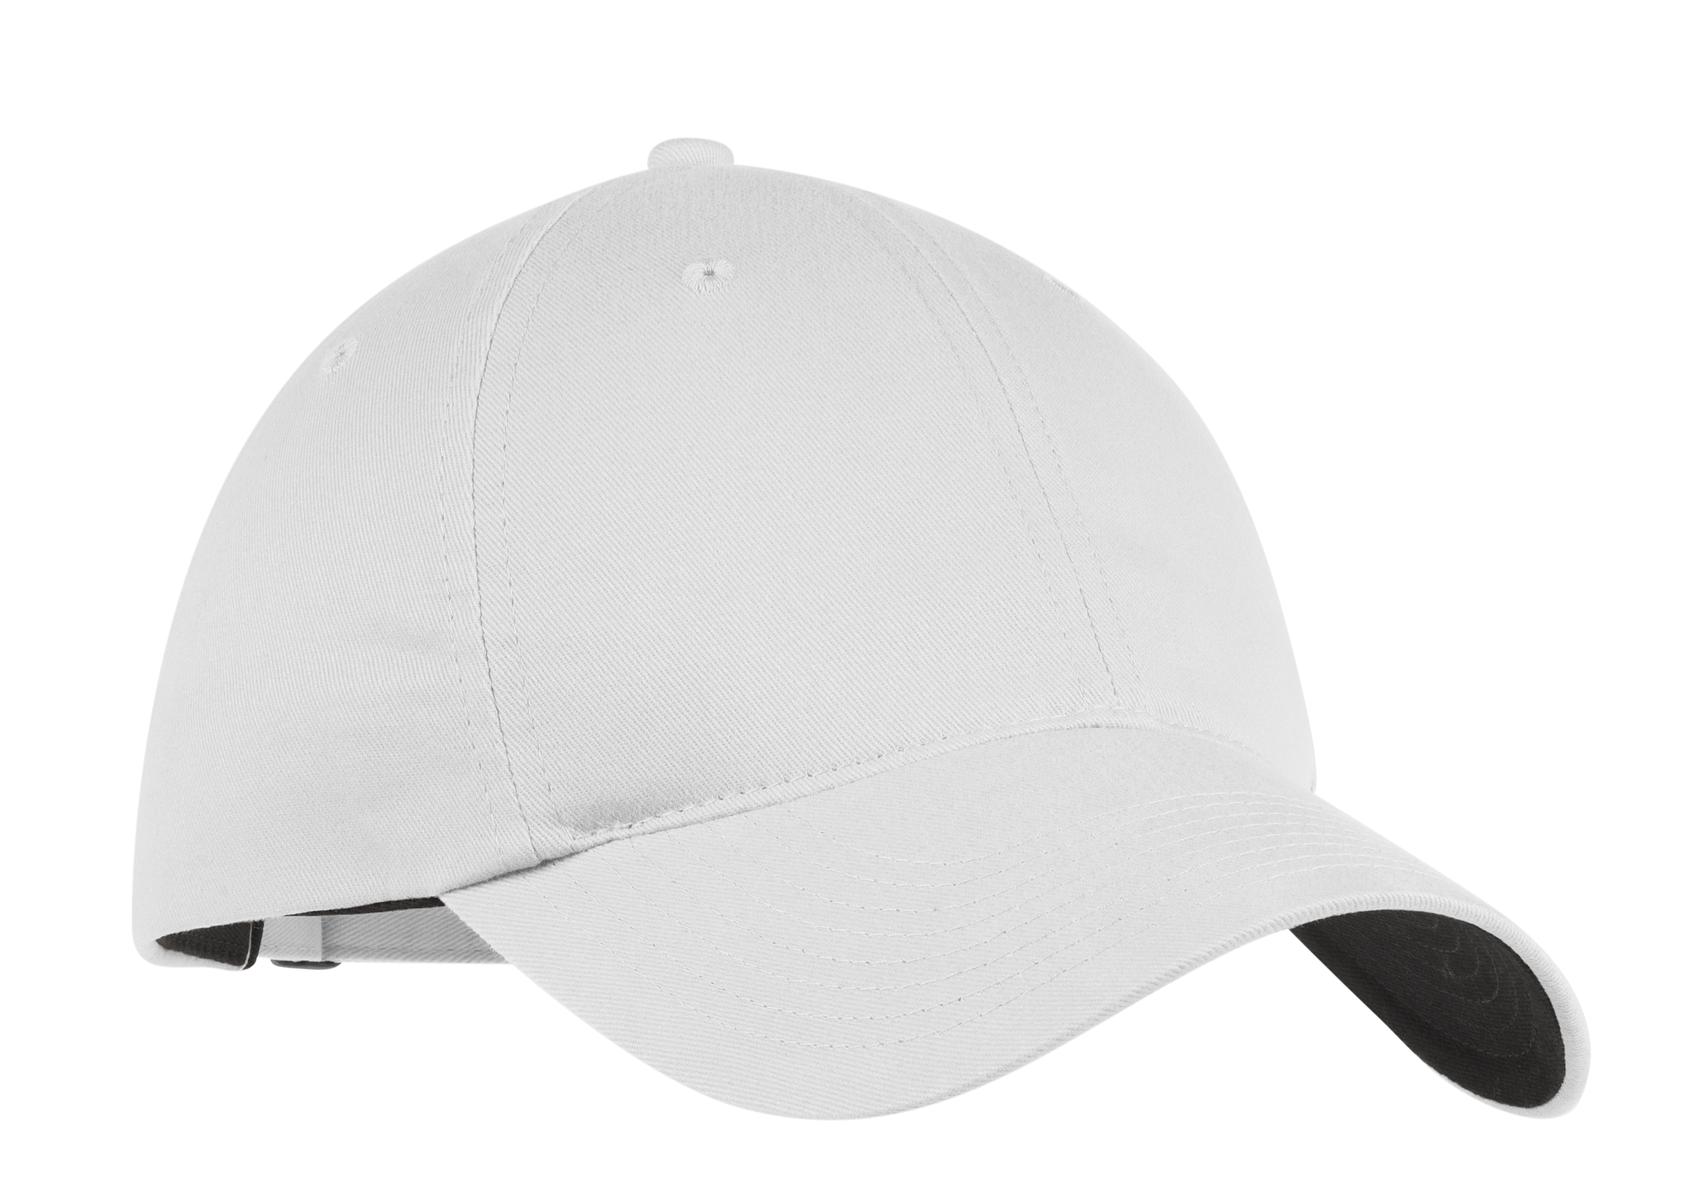 Nike Unstructured Twill Cap-